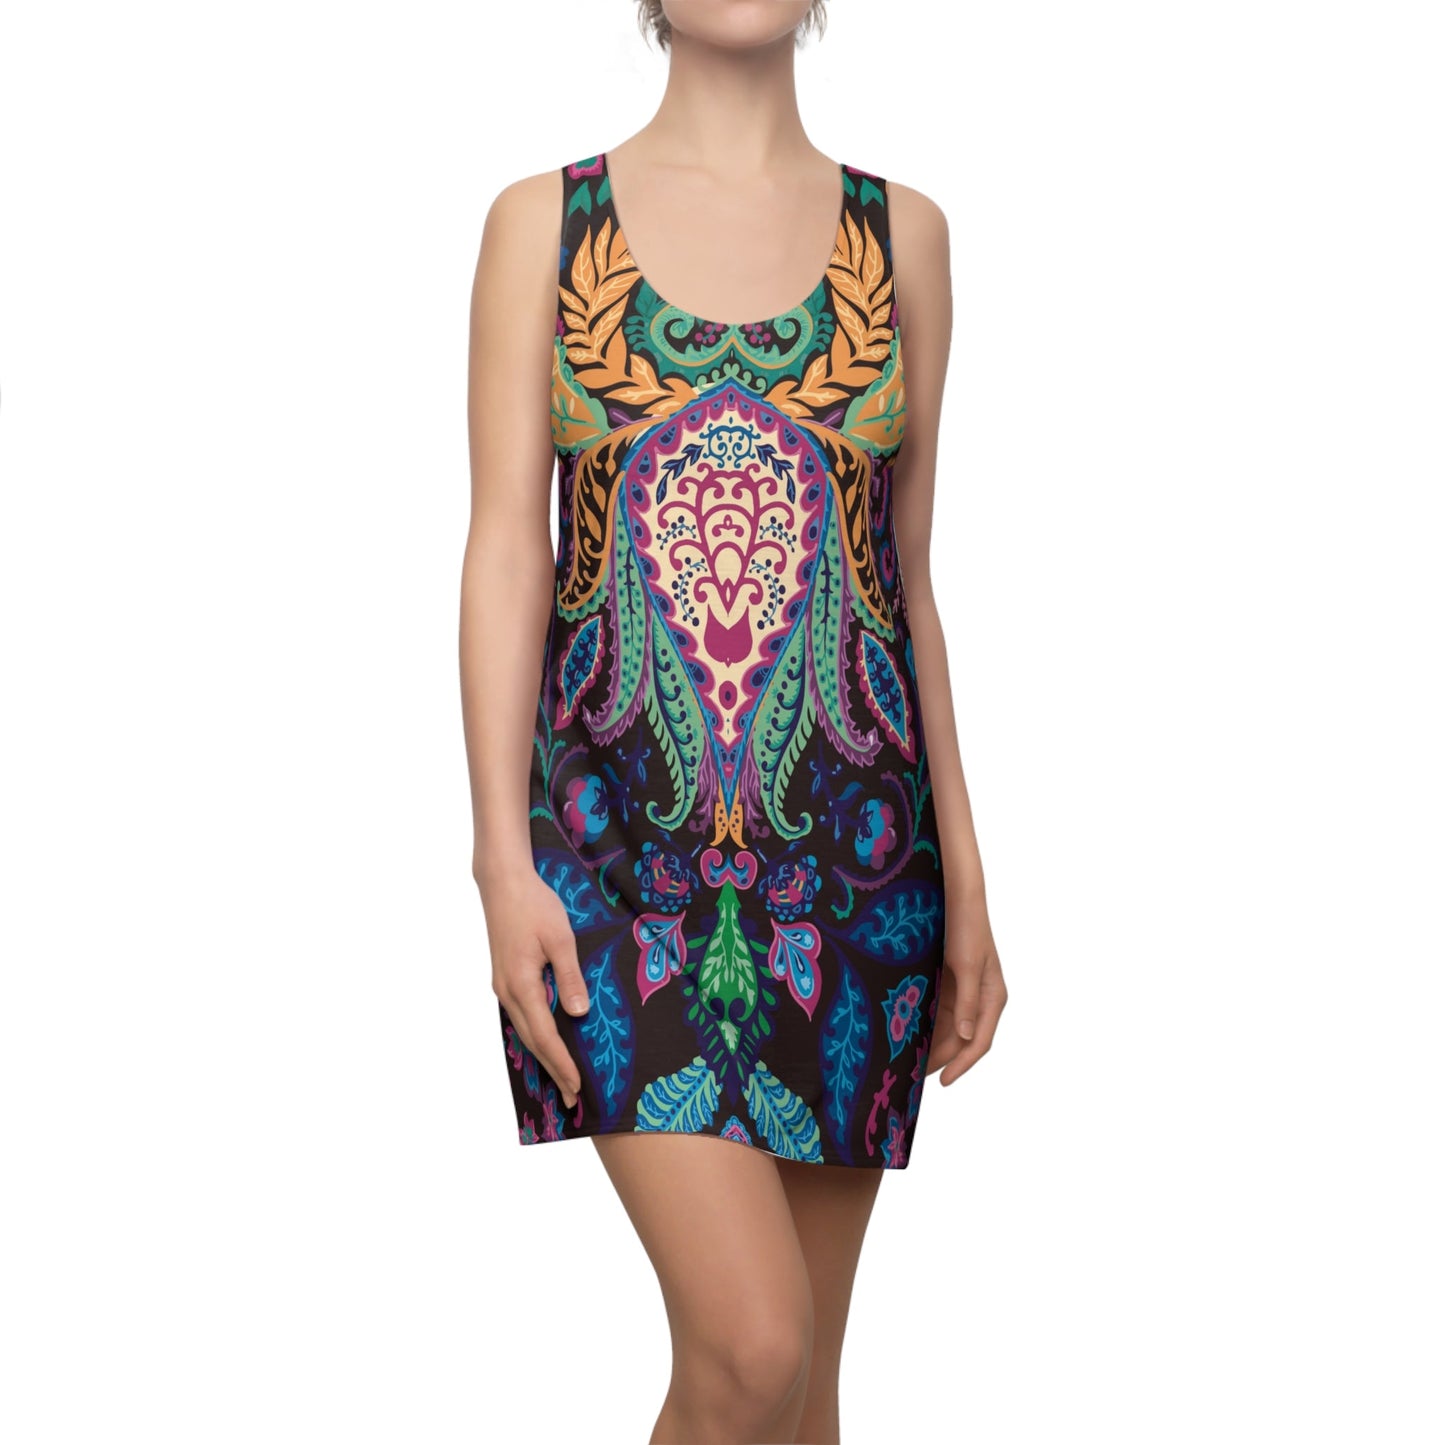 All Over Prints - Women's Psychedelic Cut & Sew Racerback Dress